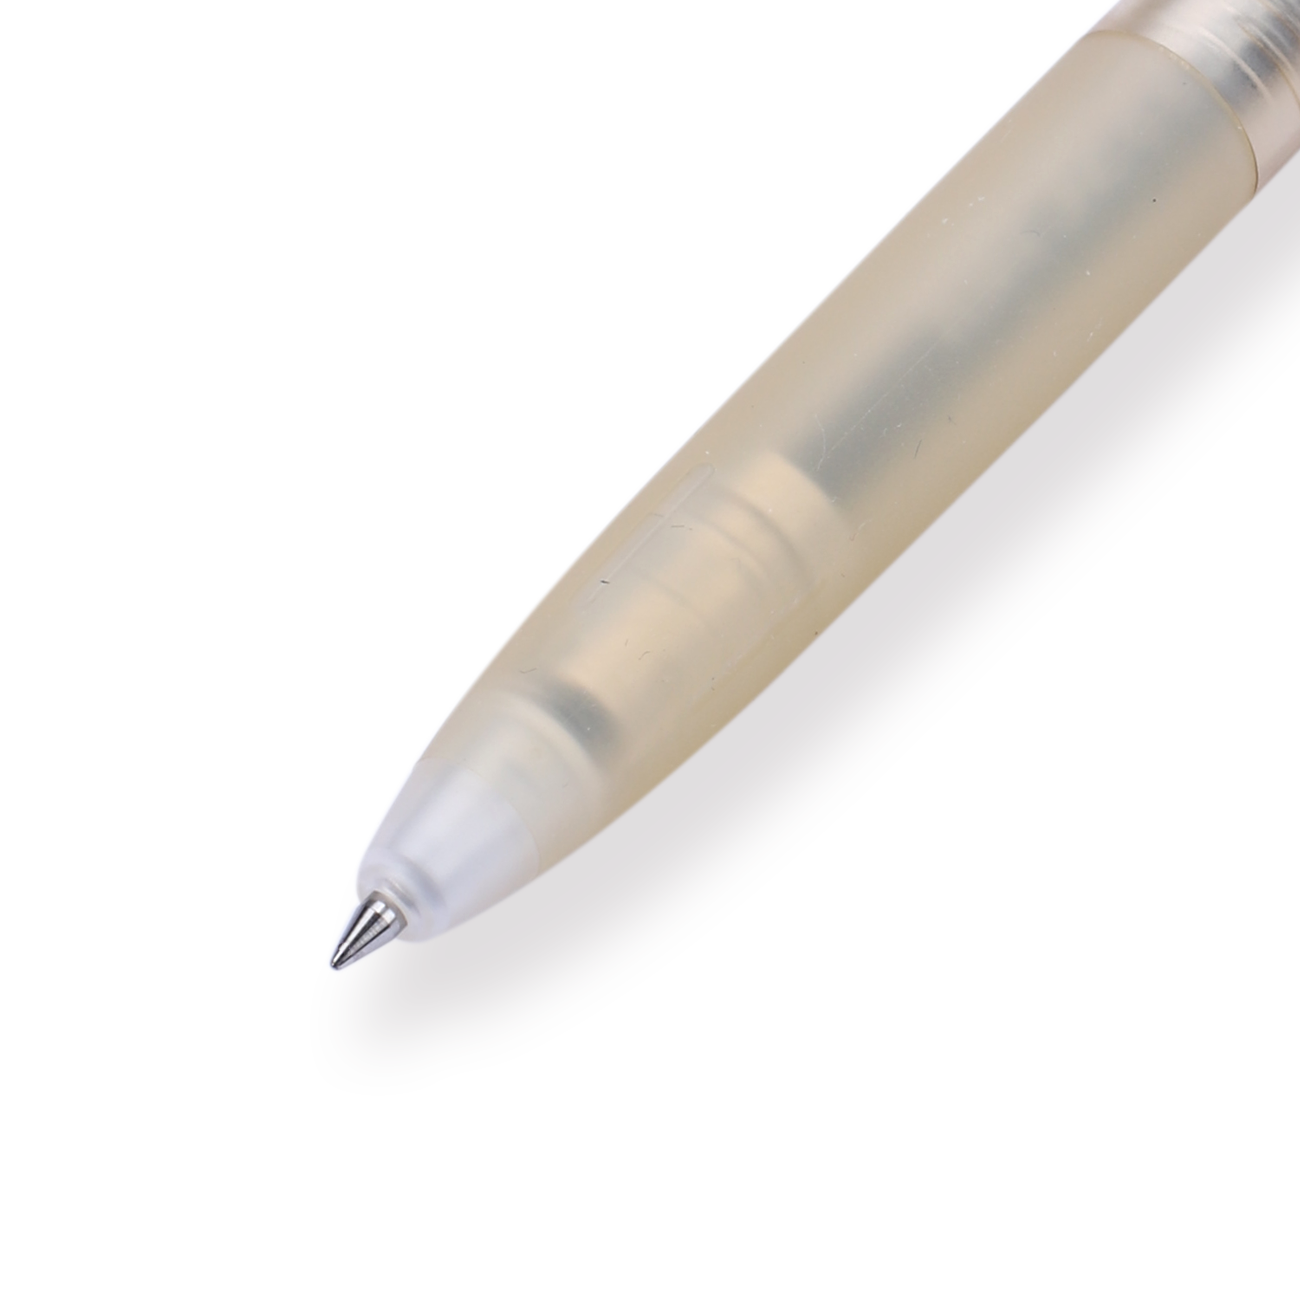 Zebra bLen Limited Edition Retractable Gel Pen - The Clear Nuance Color - Ochre - Stationery Pal